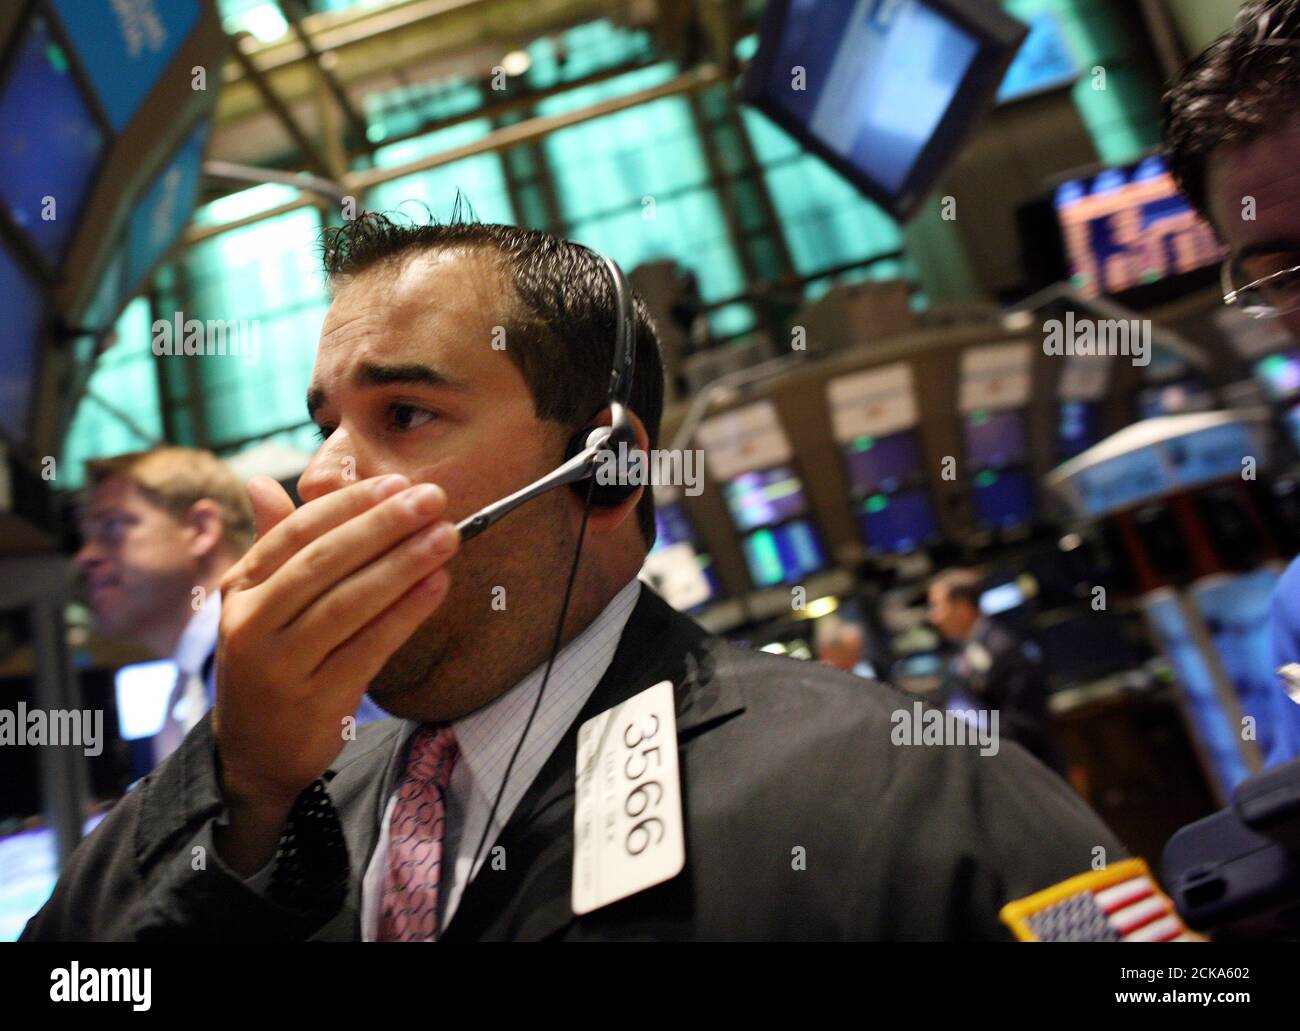 Traders work on the floor of the New York Stock Exchange, April 27, 2009. The S&P 500 and Nasdaq briefly turned lower on Monday, and the Dow Jones industrial average pared gains, after the World Health Organization (WHO) commented on the swine flu outbreak.   REUTERS/Brendan McDermid (UNITED STATES BUSINESS IMAGES OF THE DAY) Stock Photo